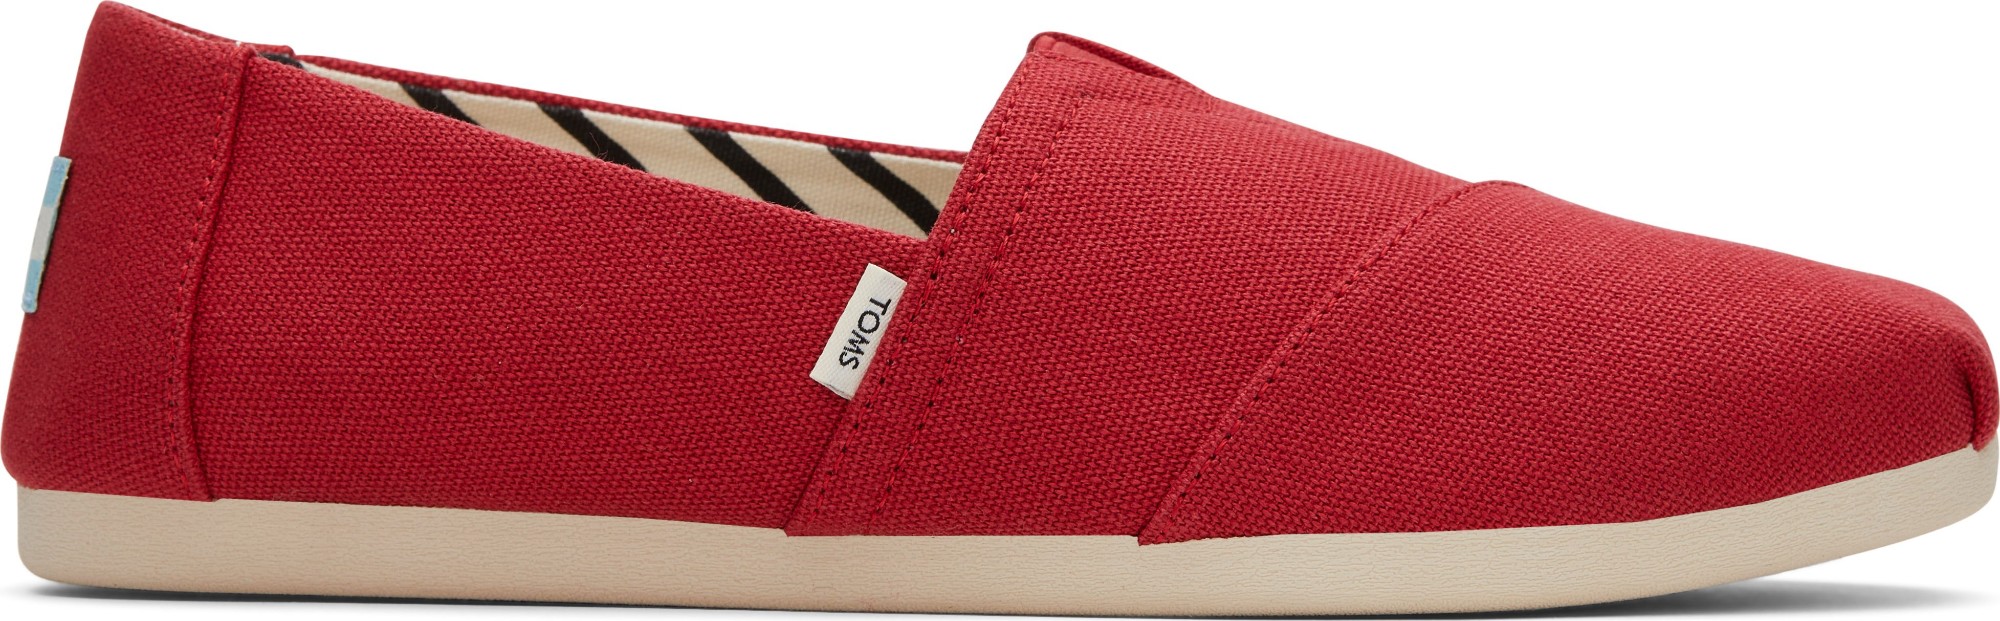 TOMS Recycled Cotton Canvas Women's Alpargata Red 37